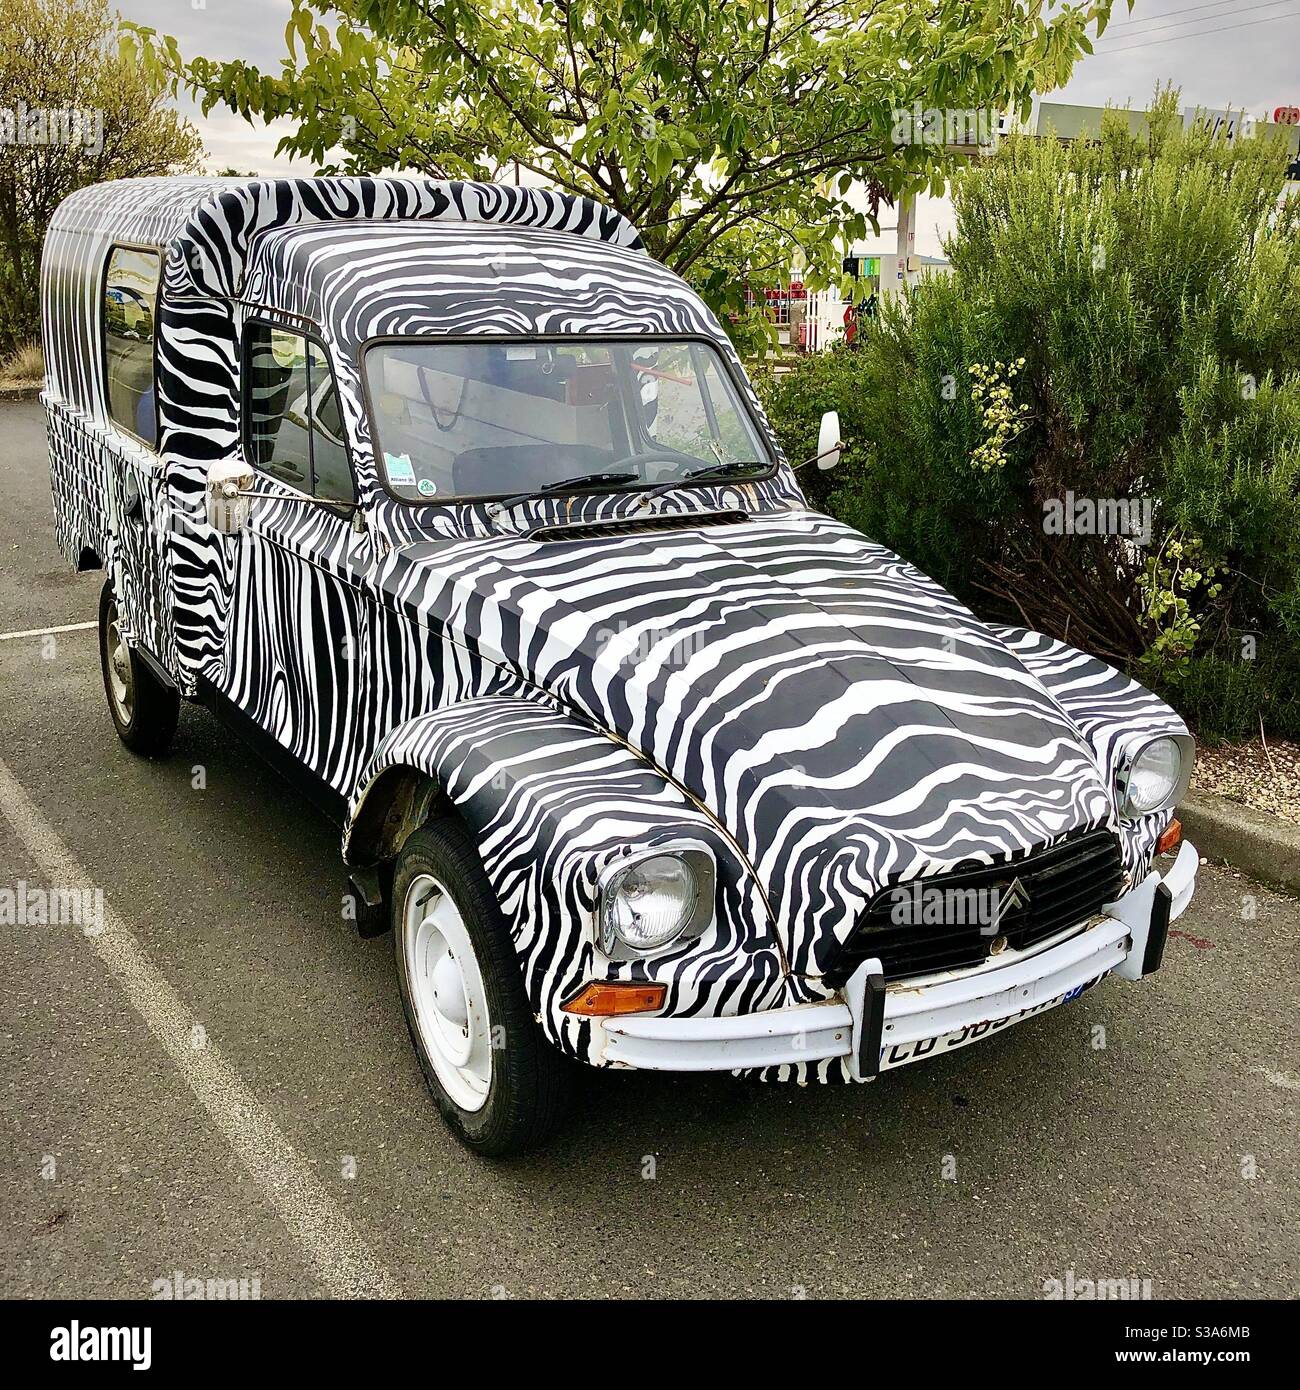 Renault 4L Camionette (small van) with black and white Zebra stripe pattern custom paintwork - France. Stock Photo